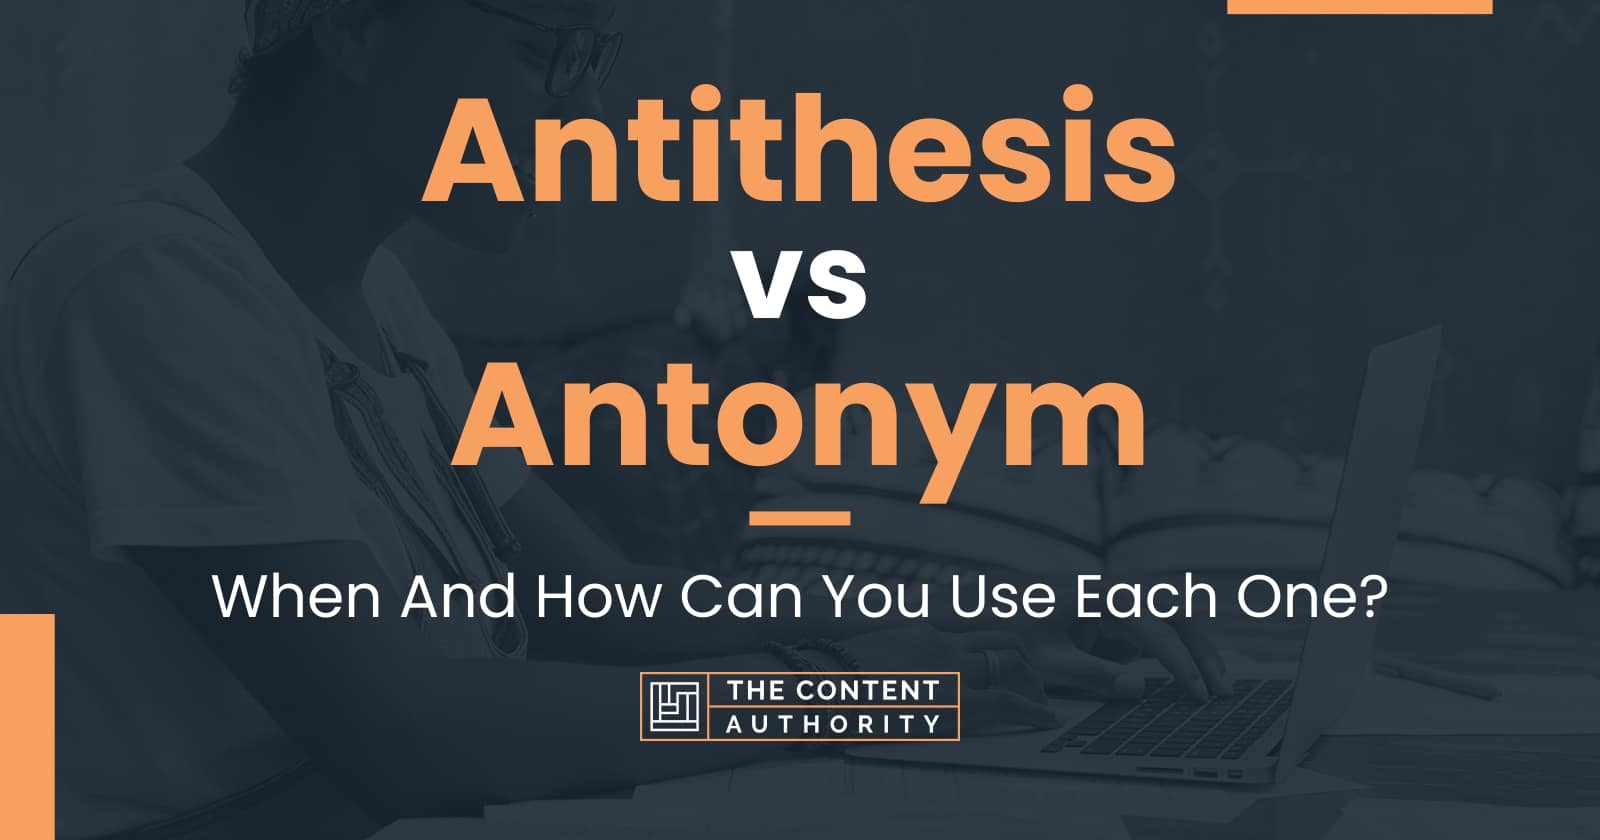 Antithesis vs Antonym: When And How Can You Use Each One?